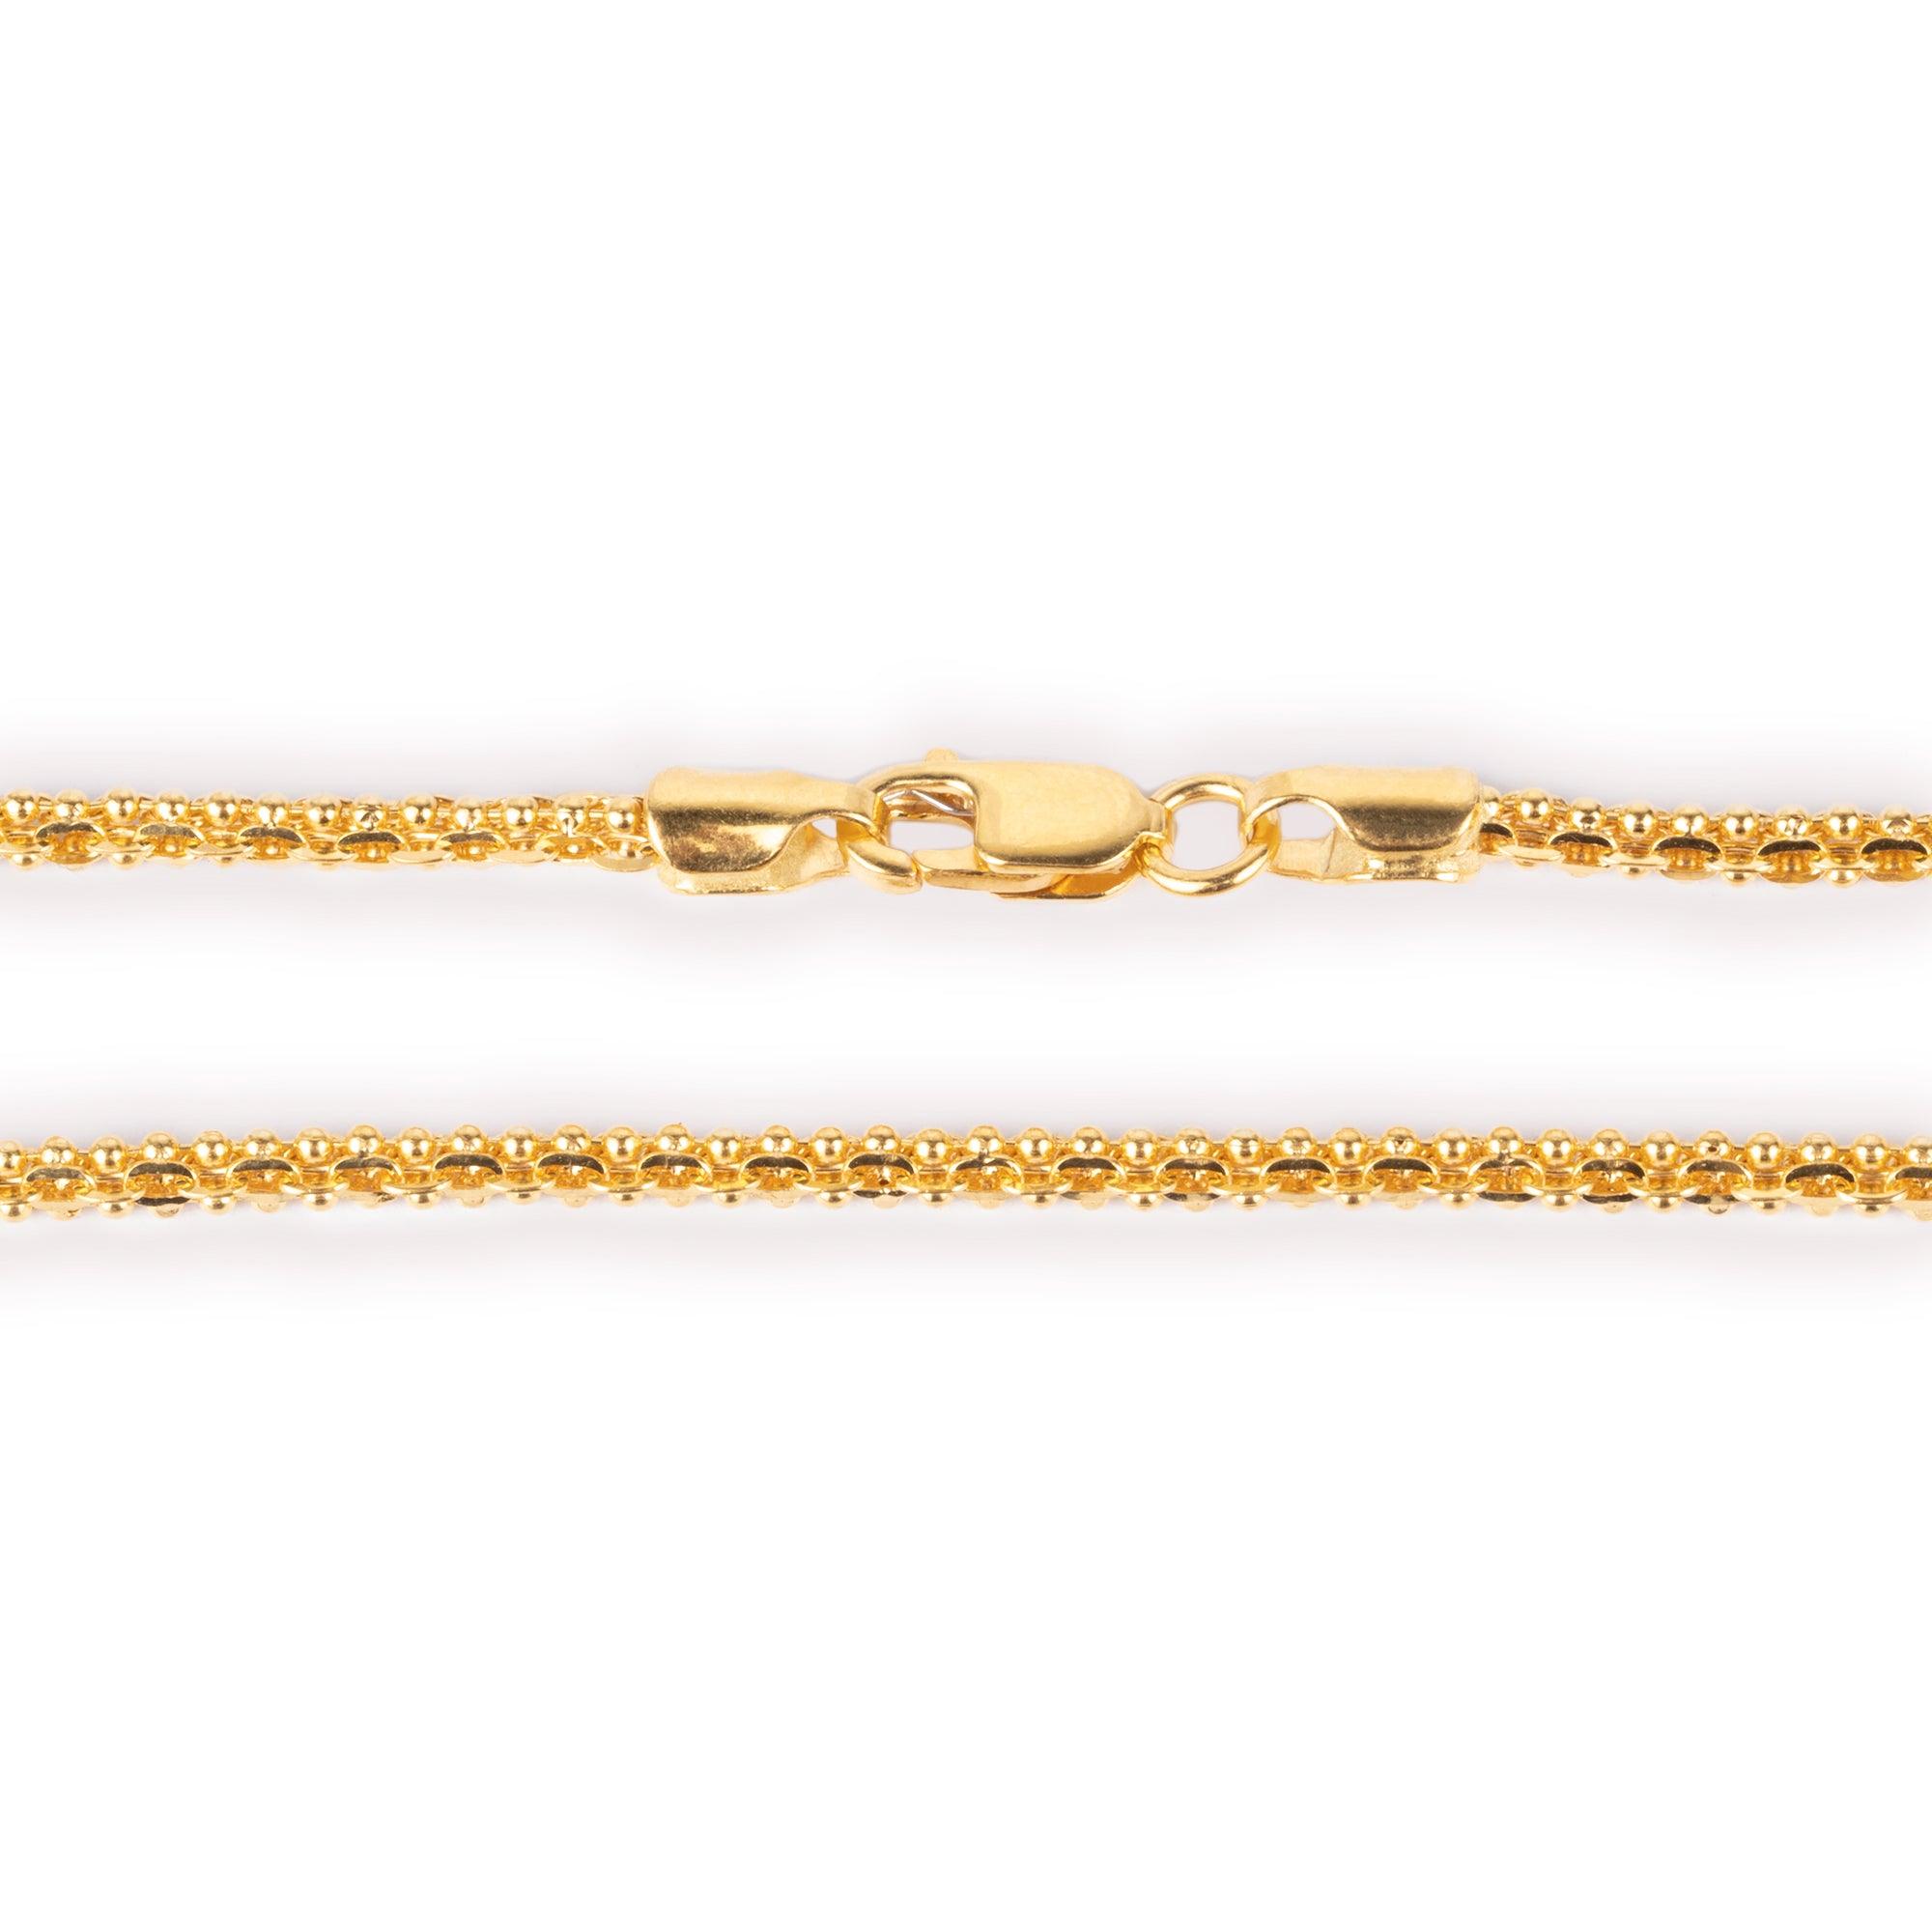 22ct Gold Fancy Box Chain with Lobster Clasp (11.6g) C-8199